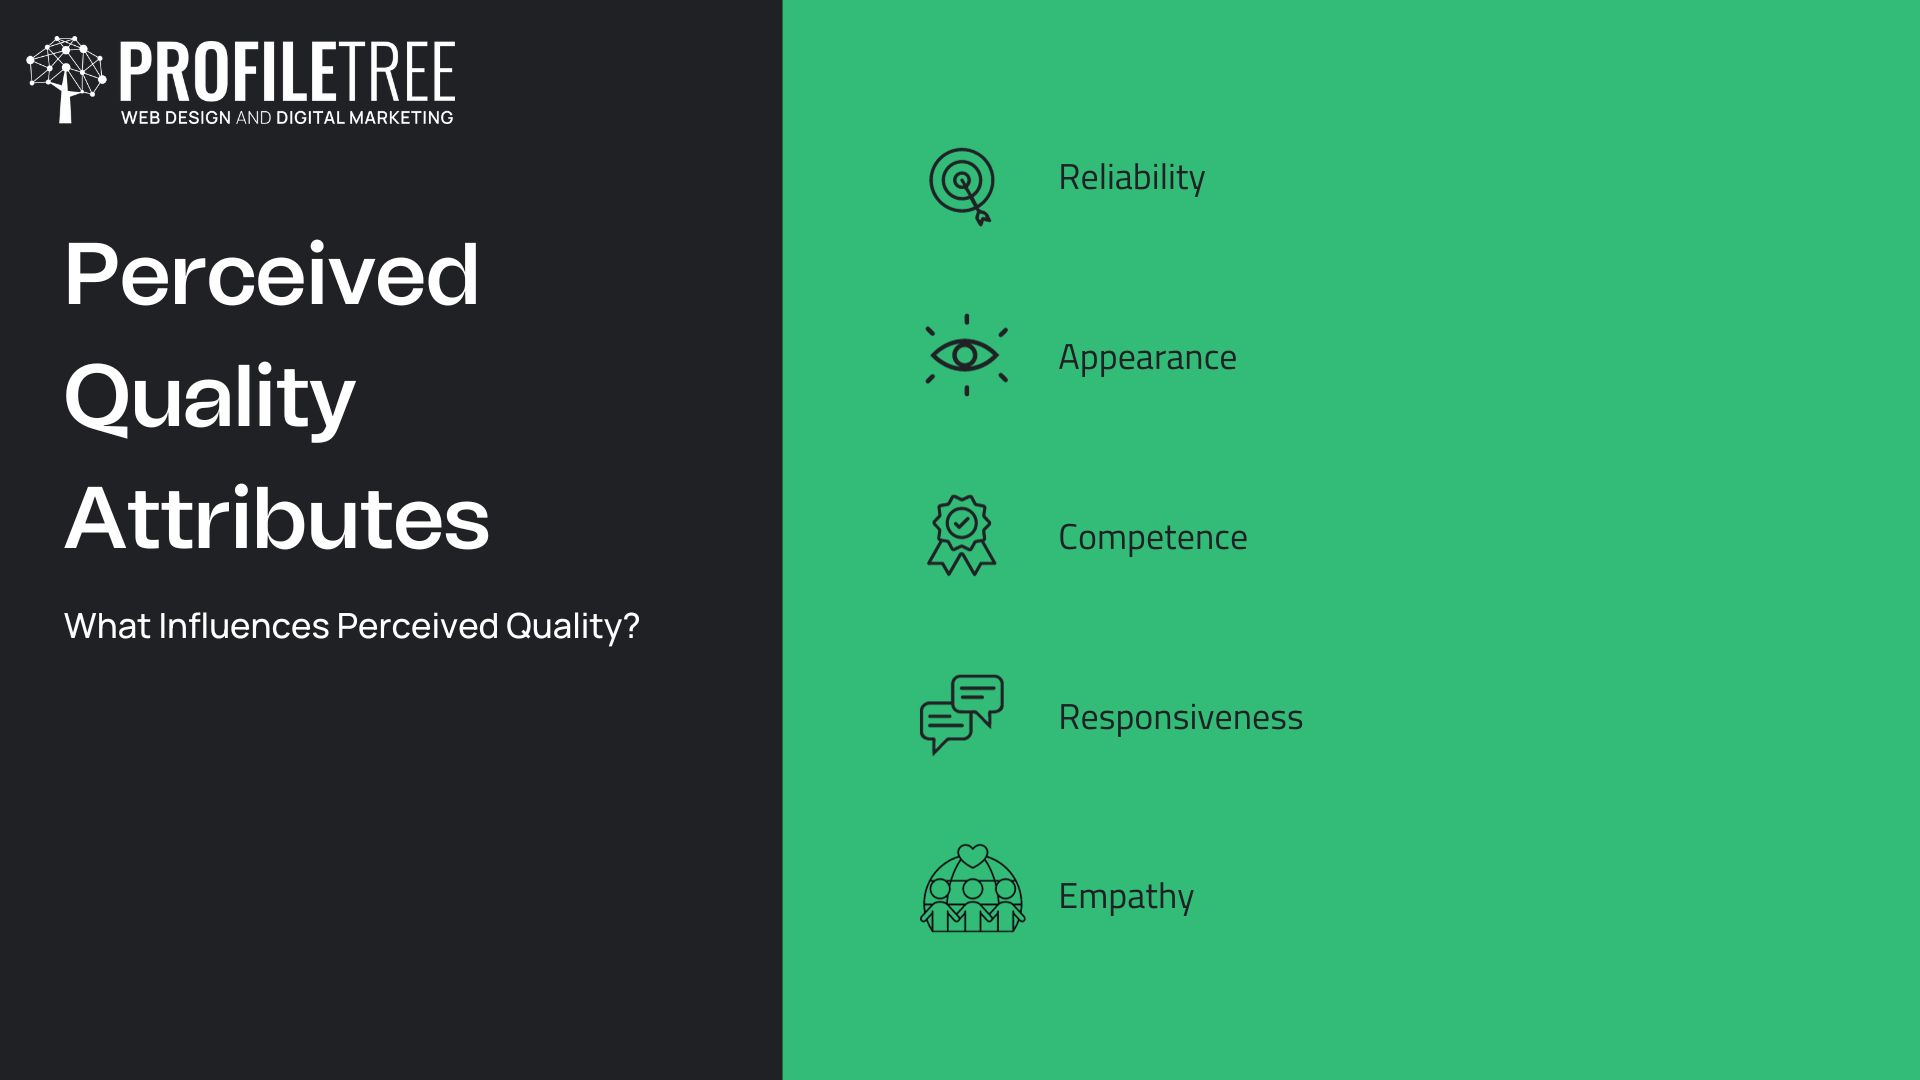 What Is Perceived Quality - What Influences a Brand's Perceived Quality?